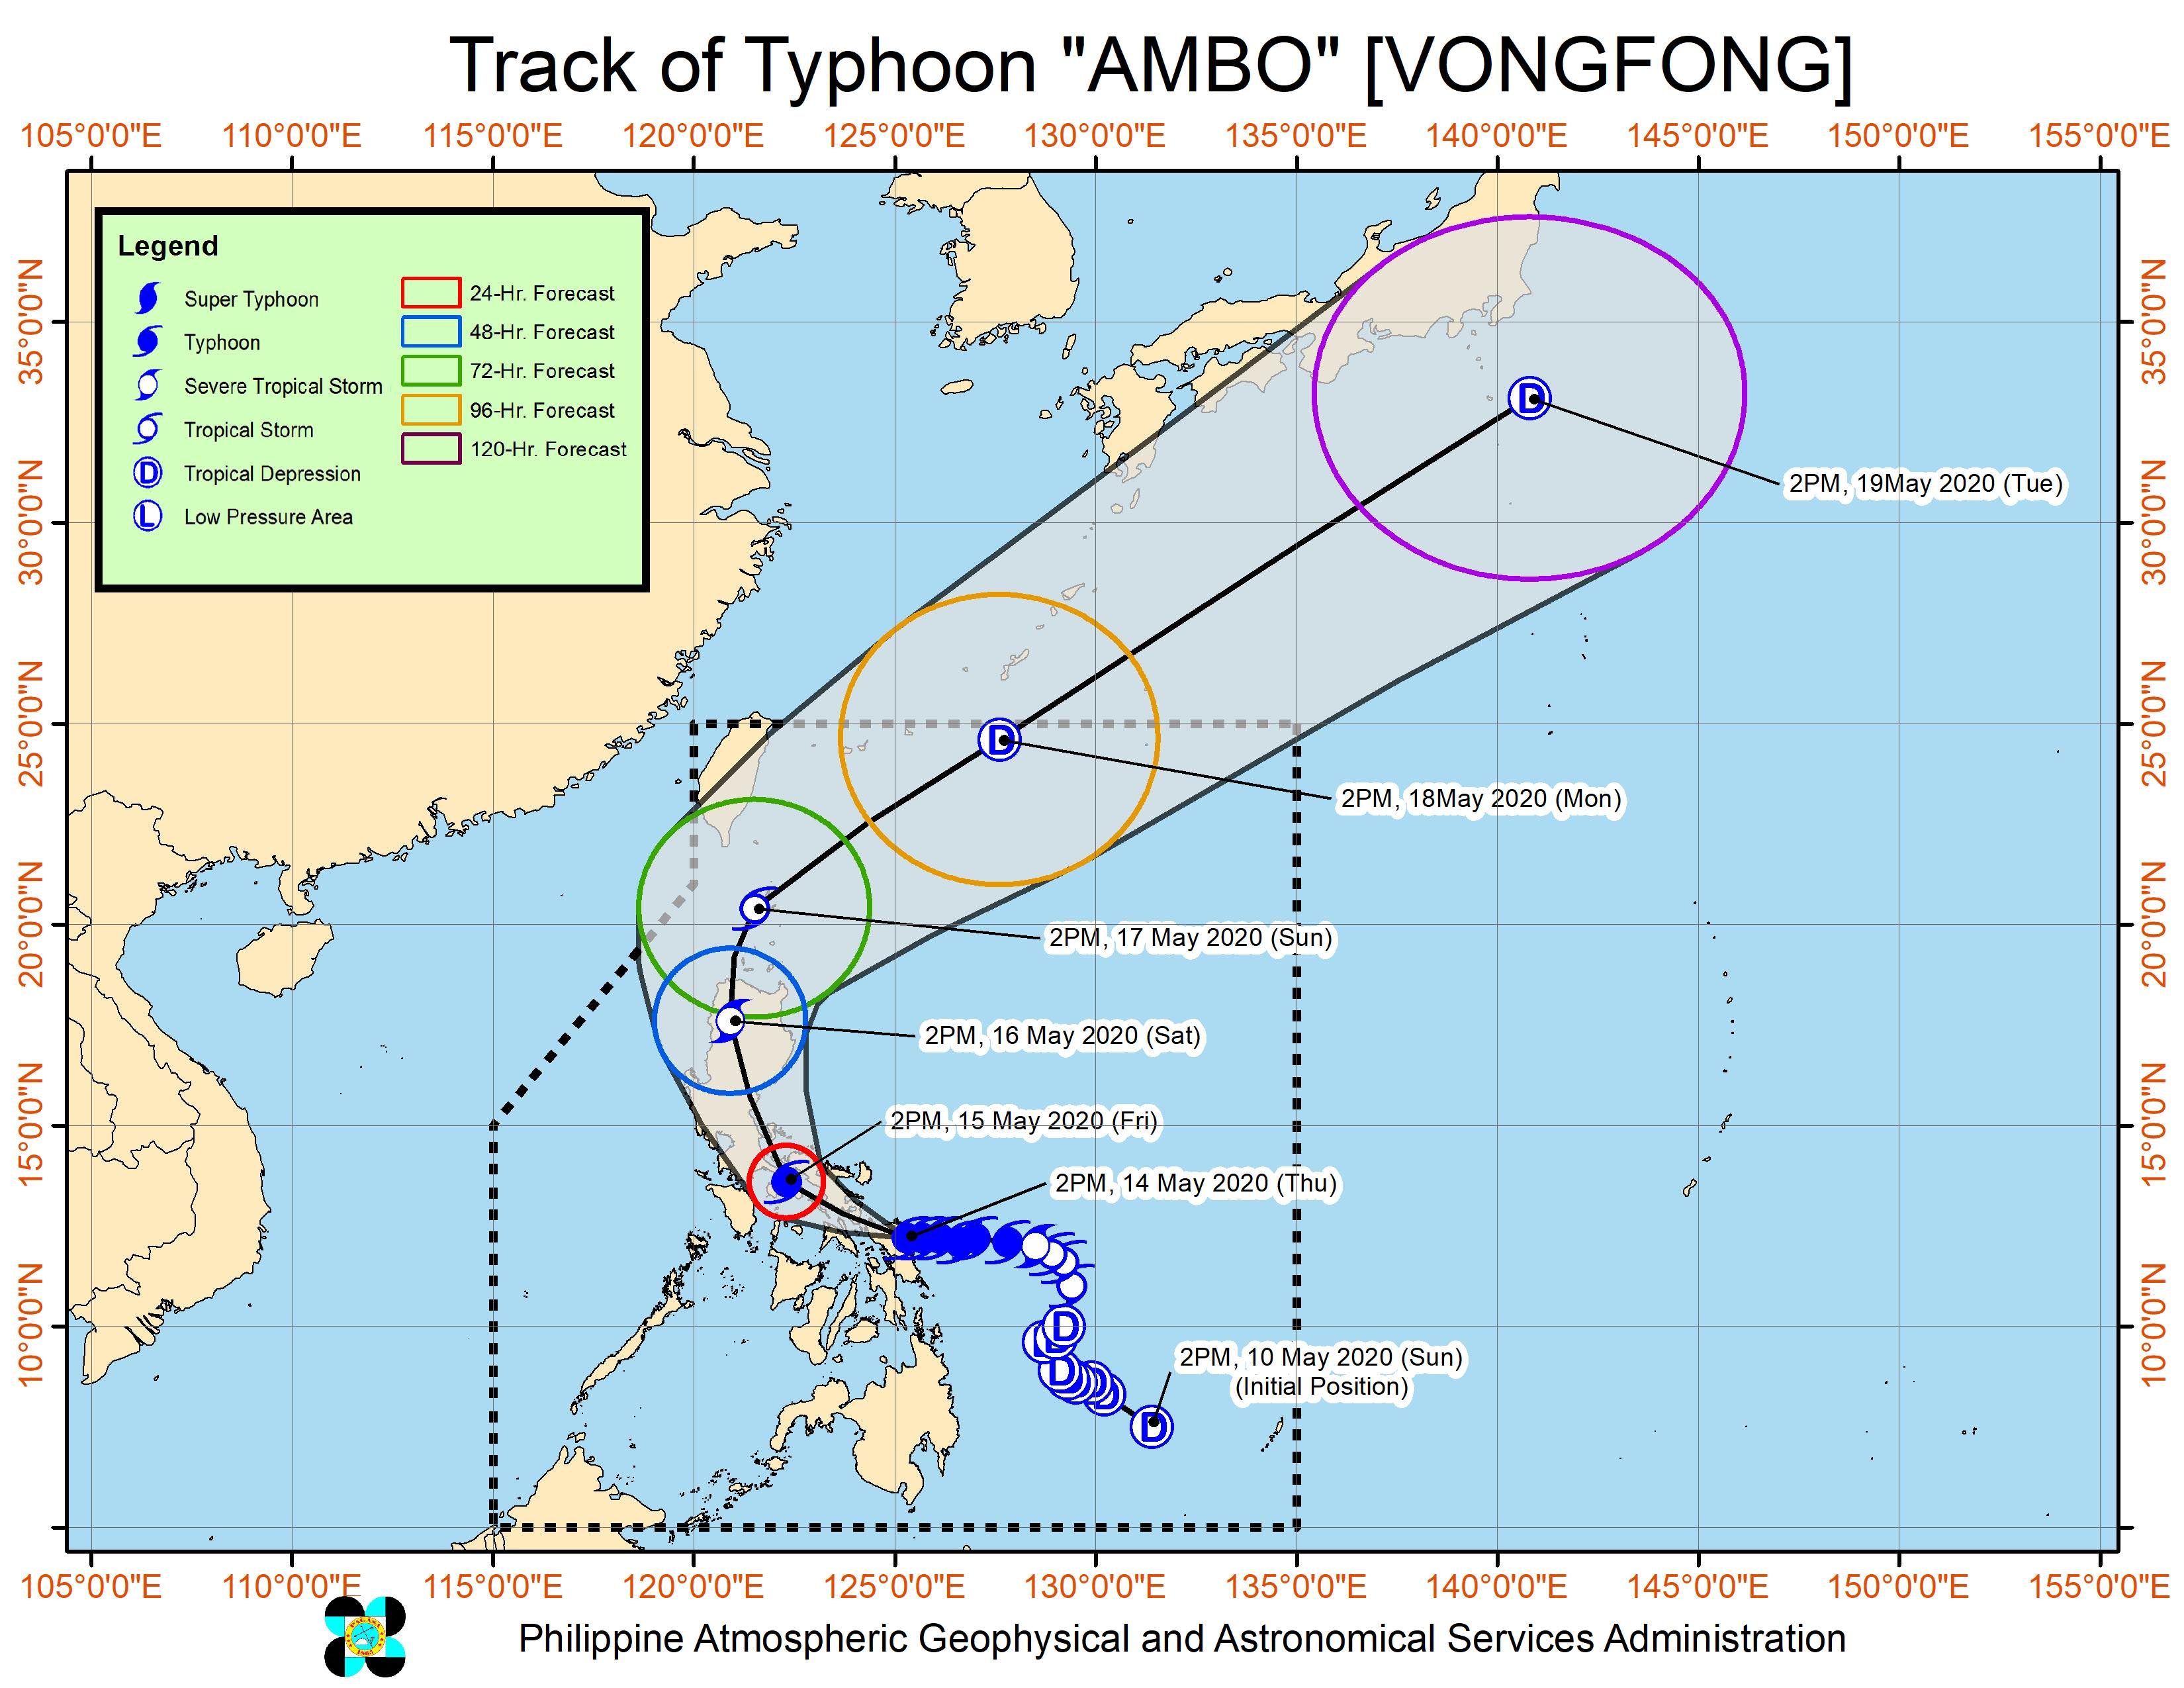 Forecast track of Typhoon Ambo (Vongfong) as of May 14, 2020, 5 pm. Image from PAGASA 